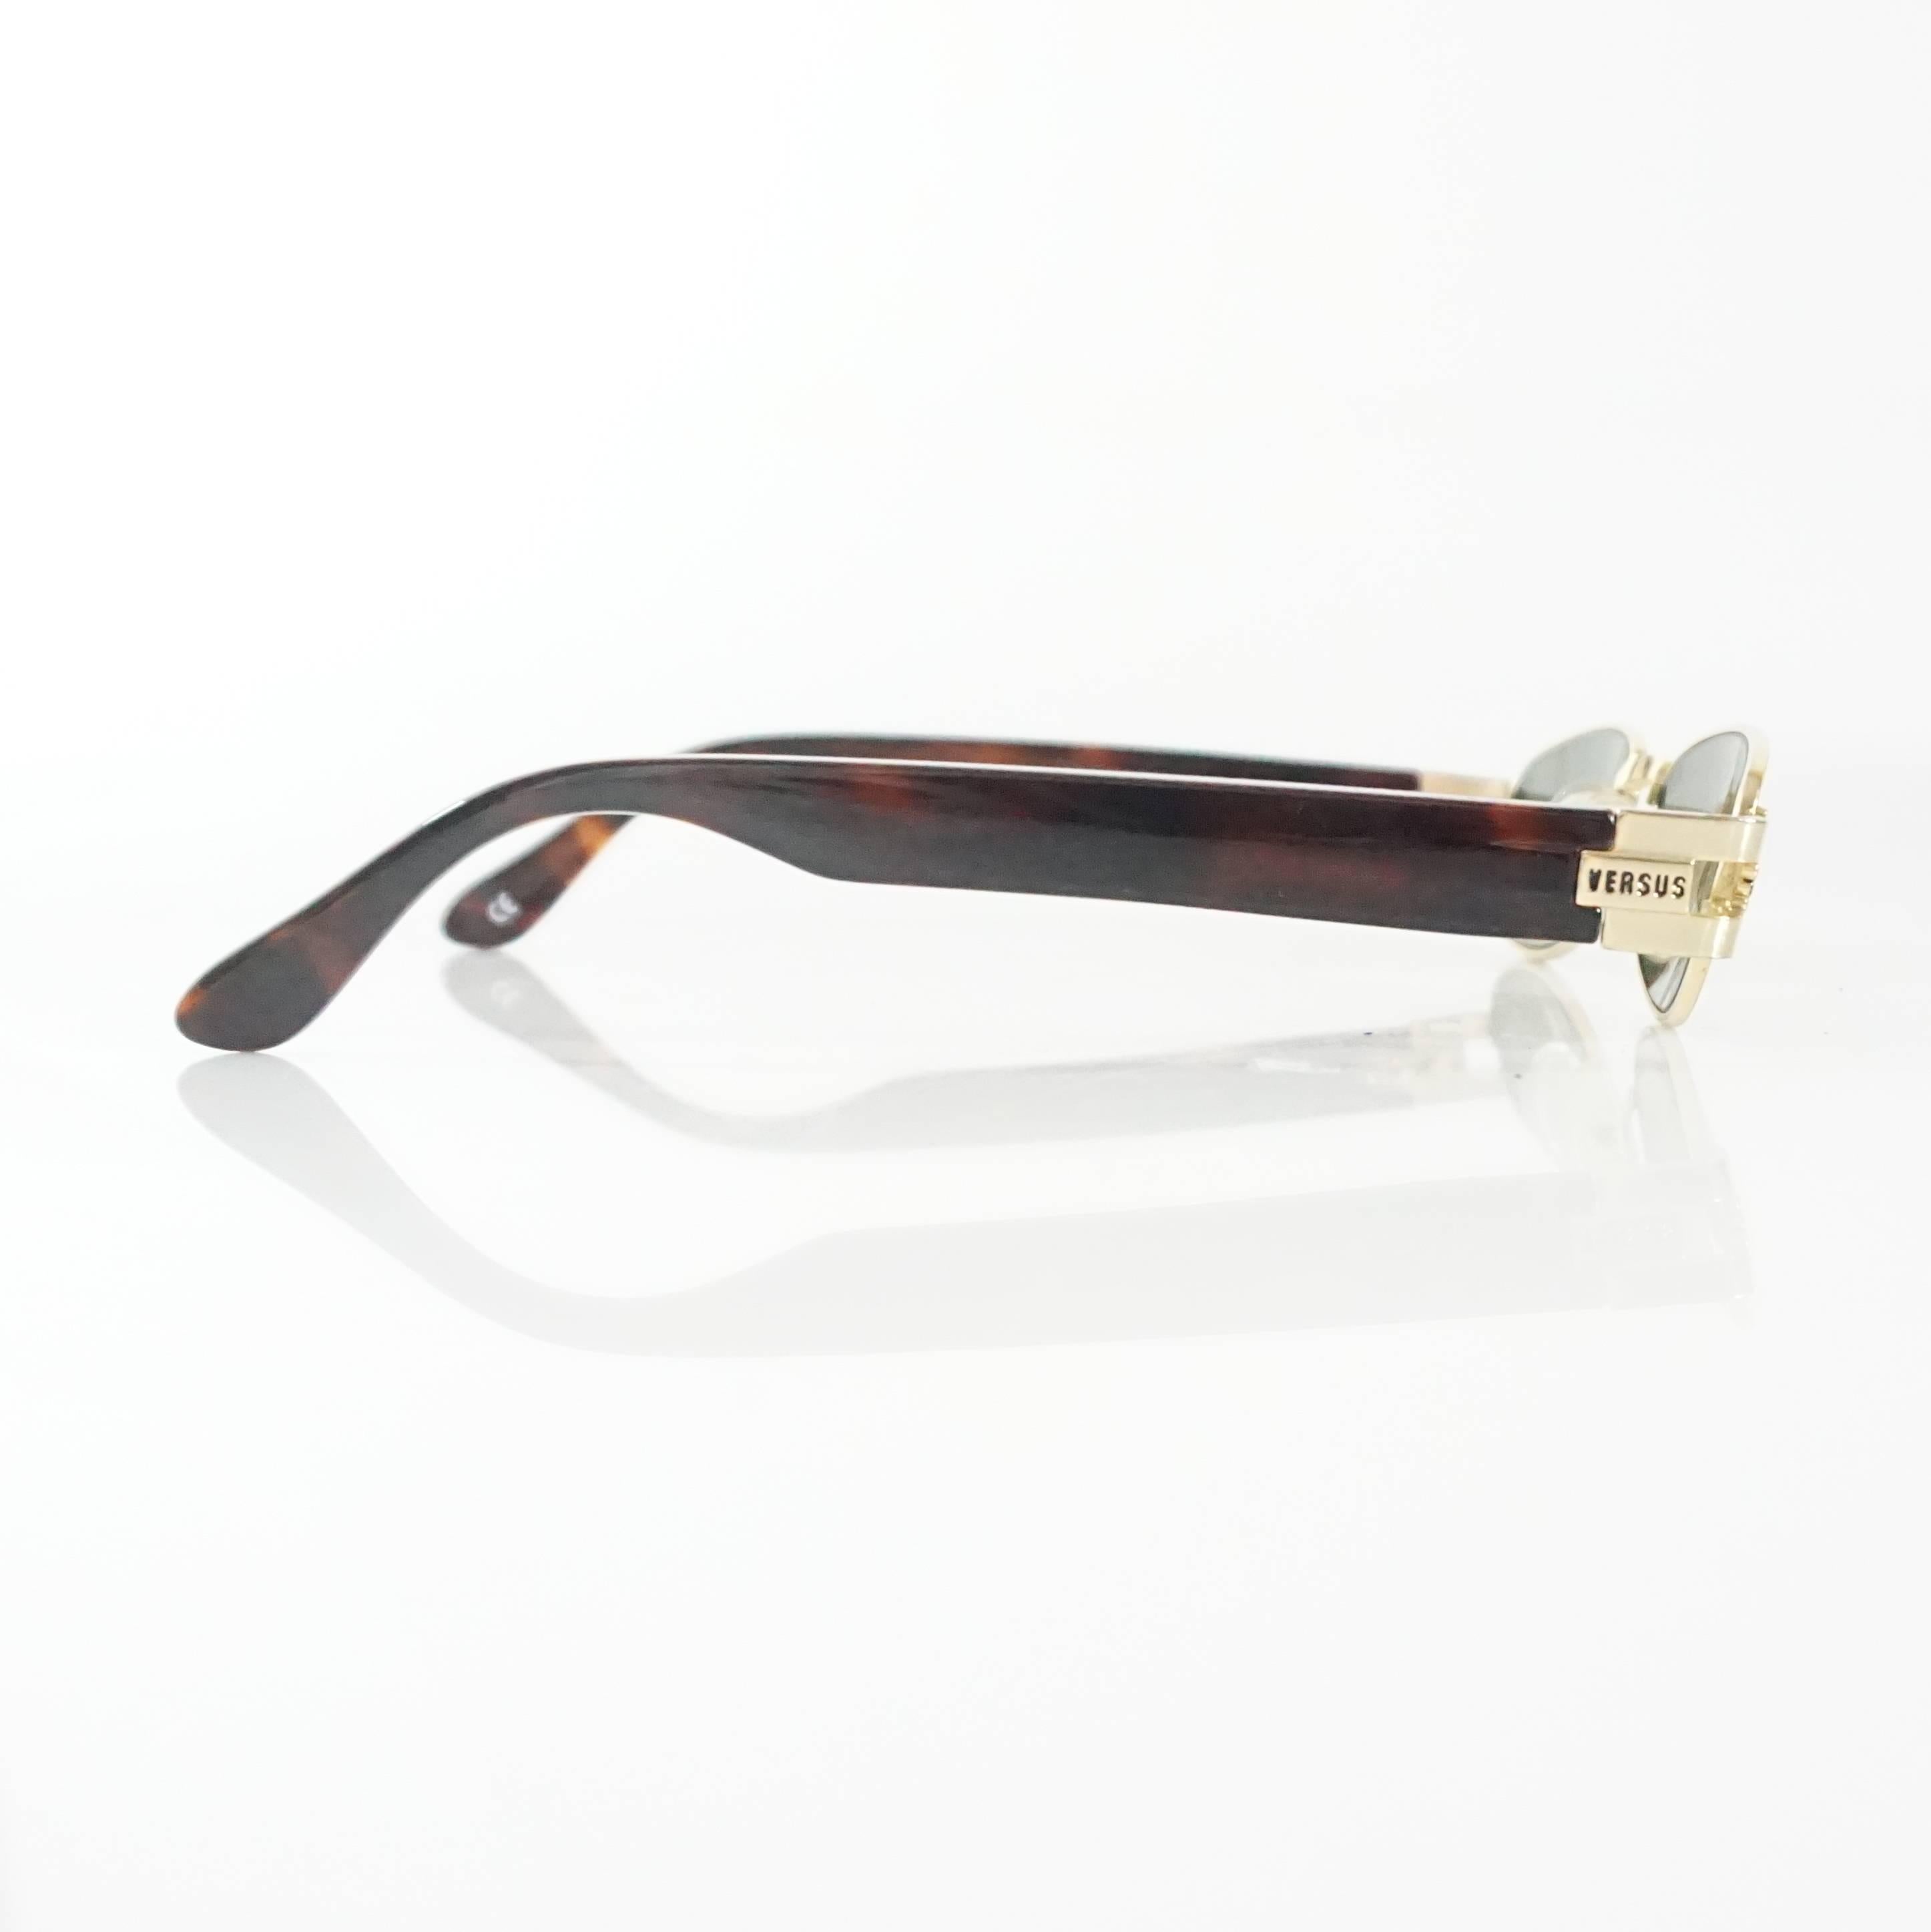 These Versus Versace sunglasses feature small rectangular lenses. The legs are thick and brown and gold tortoiseshell print. These sunglasses are in excellent condition. 

Measurements
Front Length: 5.13"
Leg Length: 5.75"
Length of Lens: